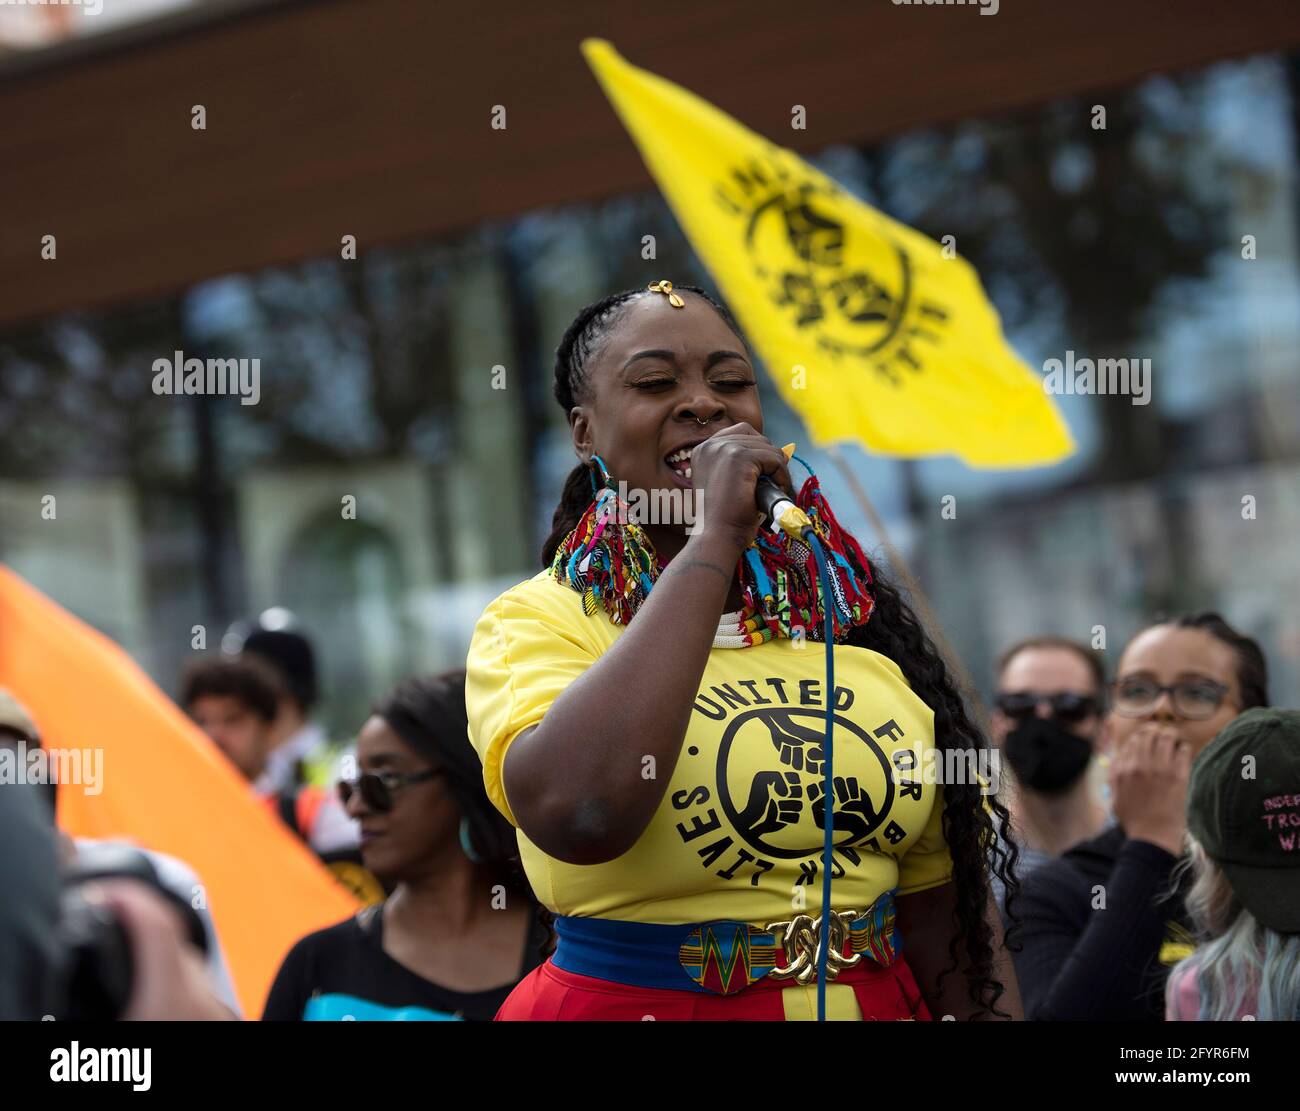 London, UK. 29th May, 2021. An activist speaks during the Kill the Bill IV Protest in London to condemn a proposed bill that will give police and the Home Secretary increased power to stop protests.The rallies are being held against the Police, Crime, Sentencing and Courts Bill. Credit: SOPA Images Limited/Alamy Live News Stock Photo